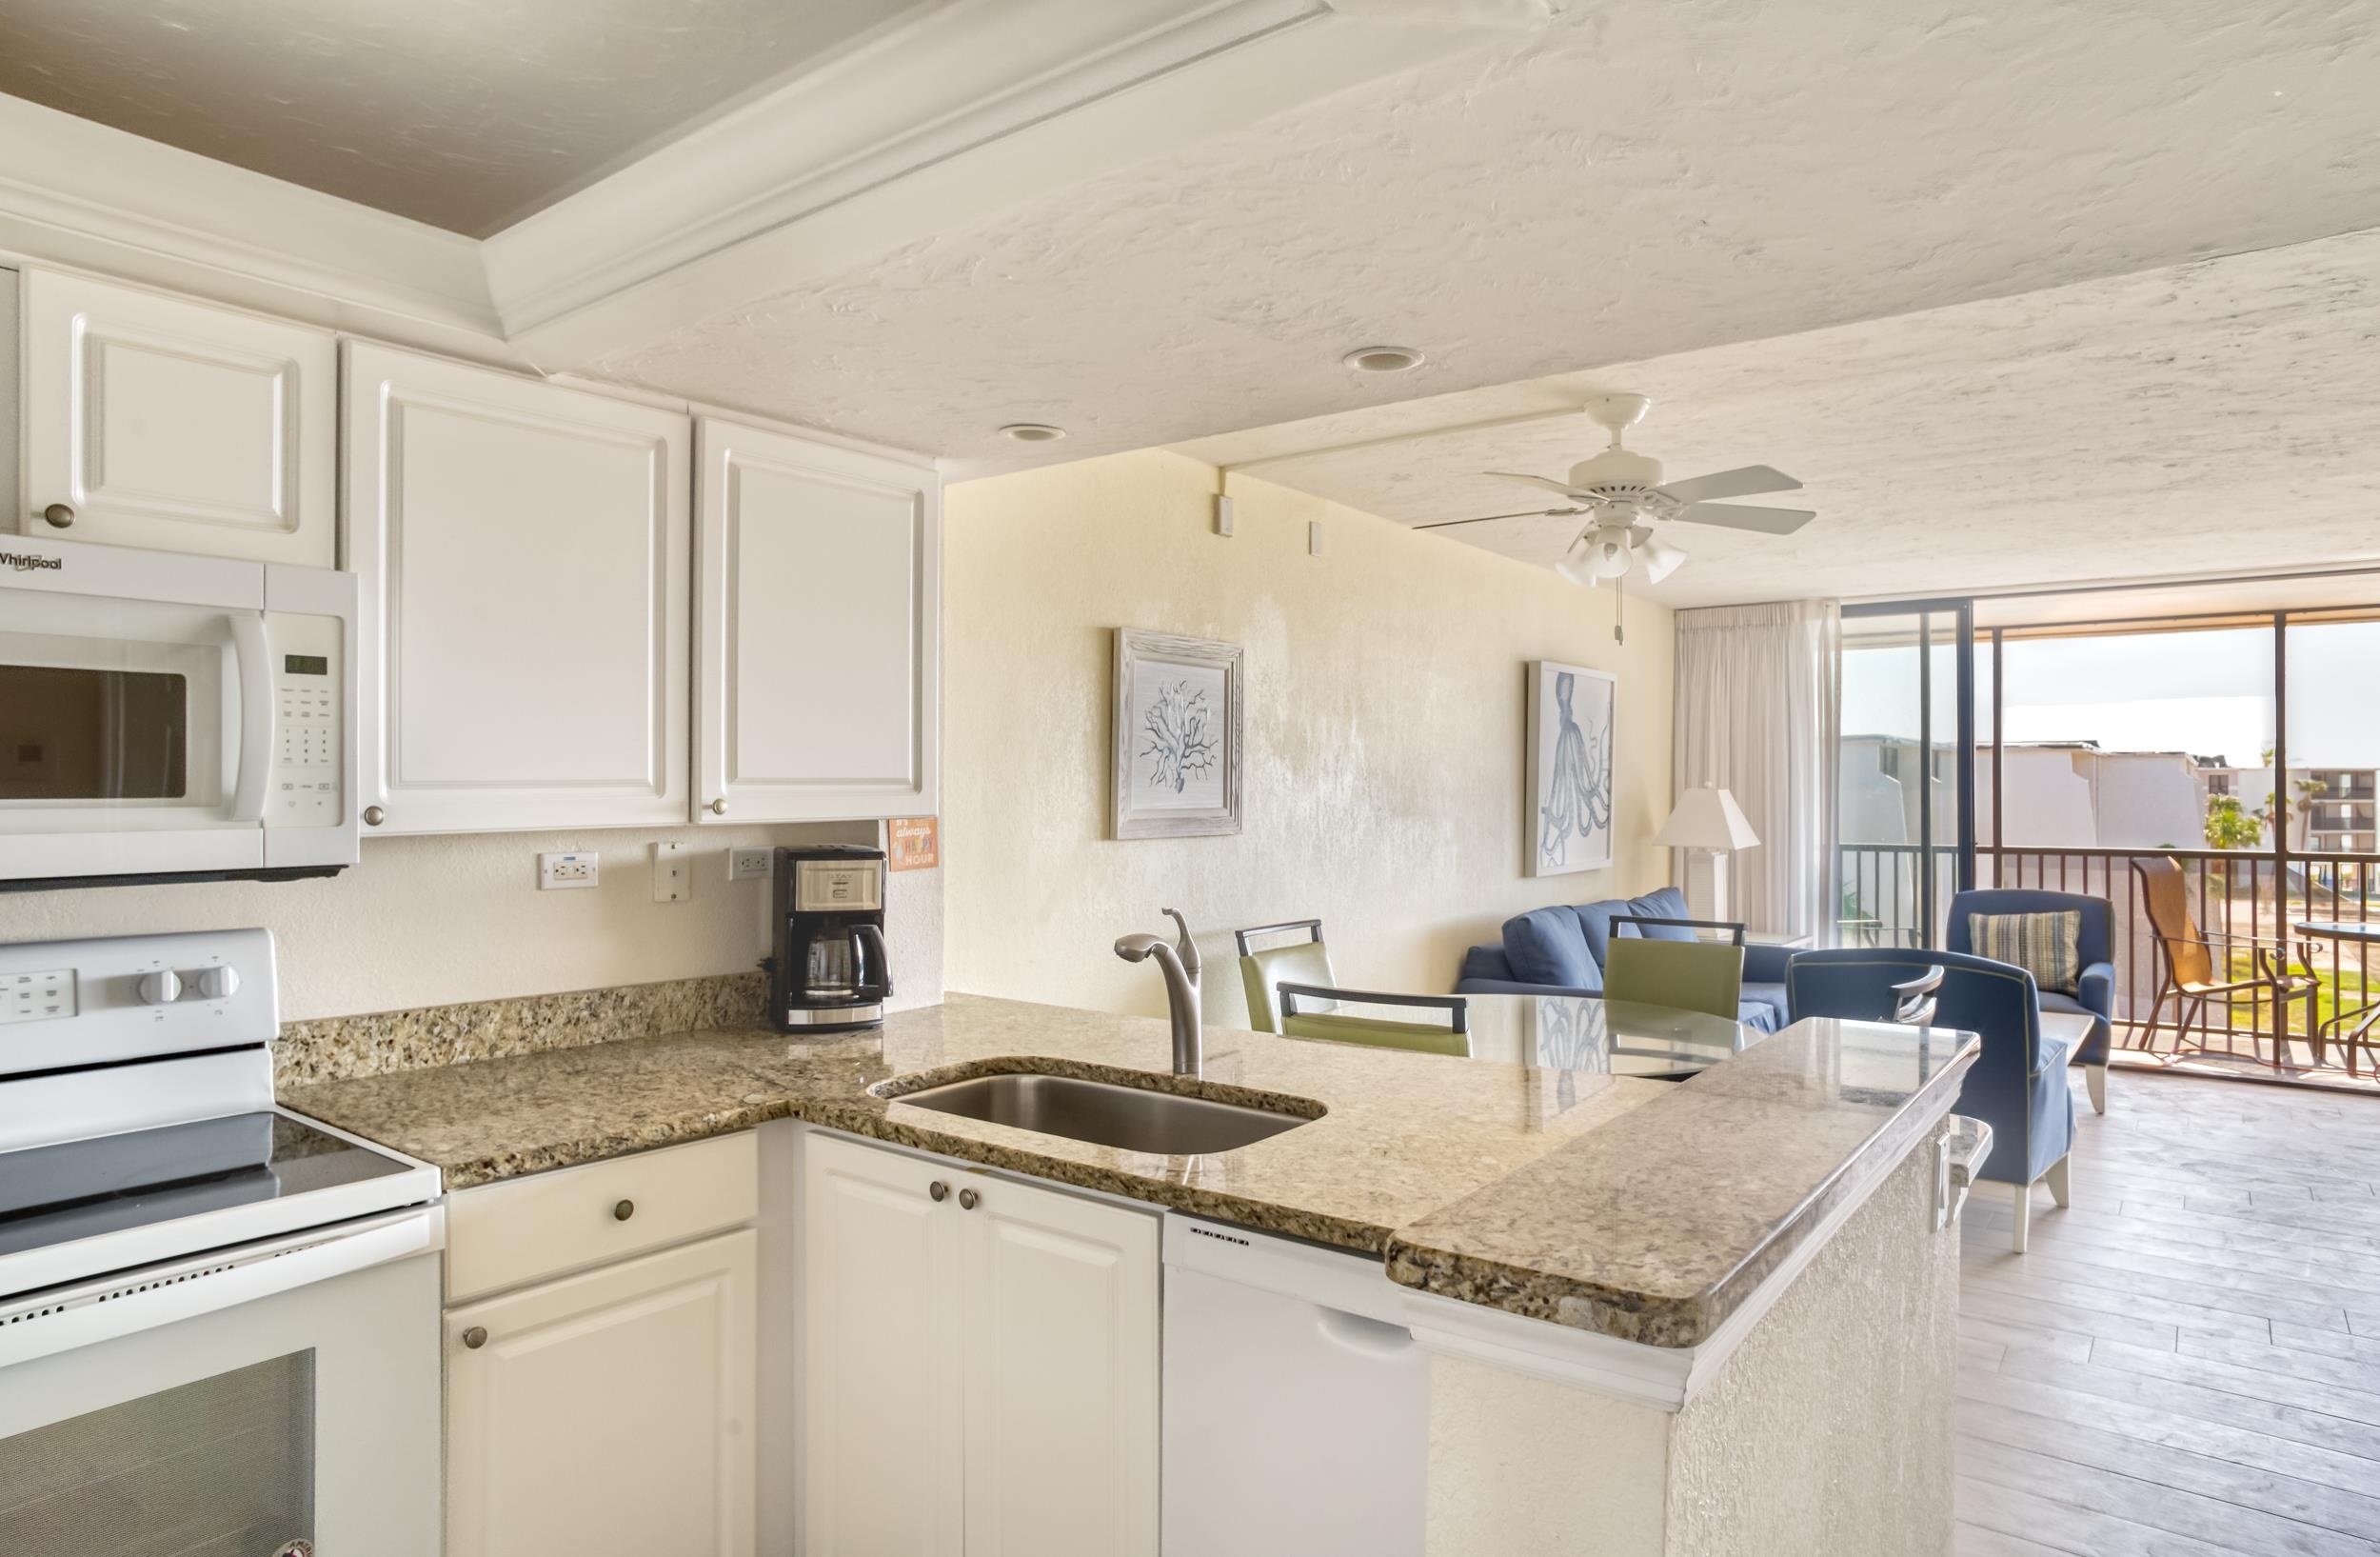 1501 Middle Gulf Dr, Sanibel, Florida 33957, 1 Bedroom Bedrooms, ,1 BathroomBathrooms,Condo,For Sale,Middle Gulf Dr,2230513